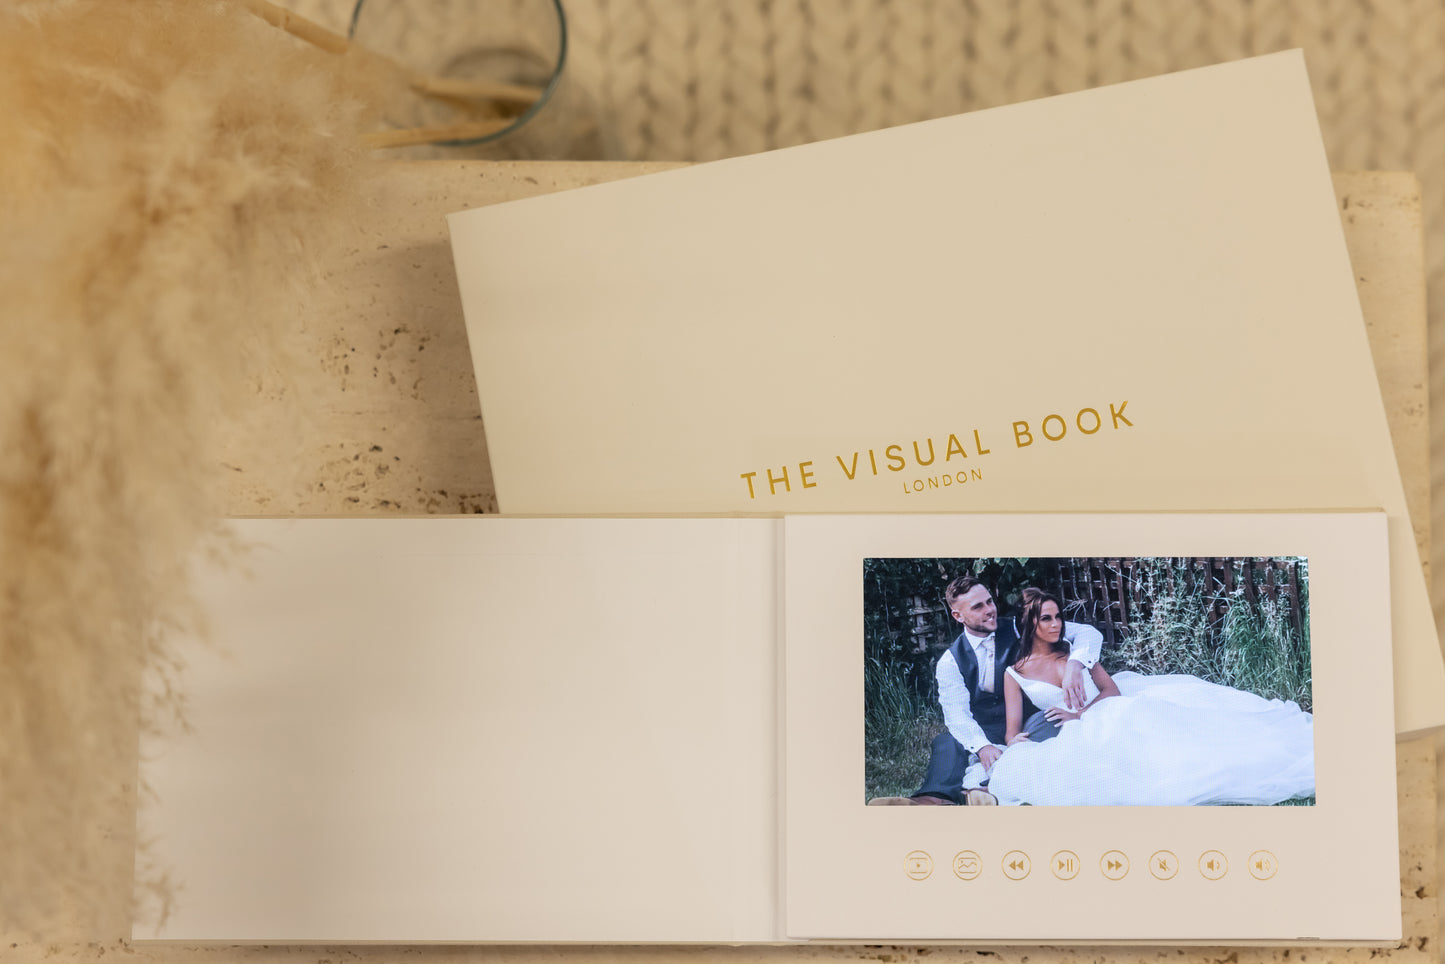 OUR WEDDING - CLASSIC VISUAL BOOK